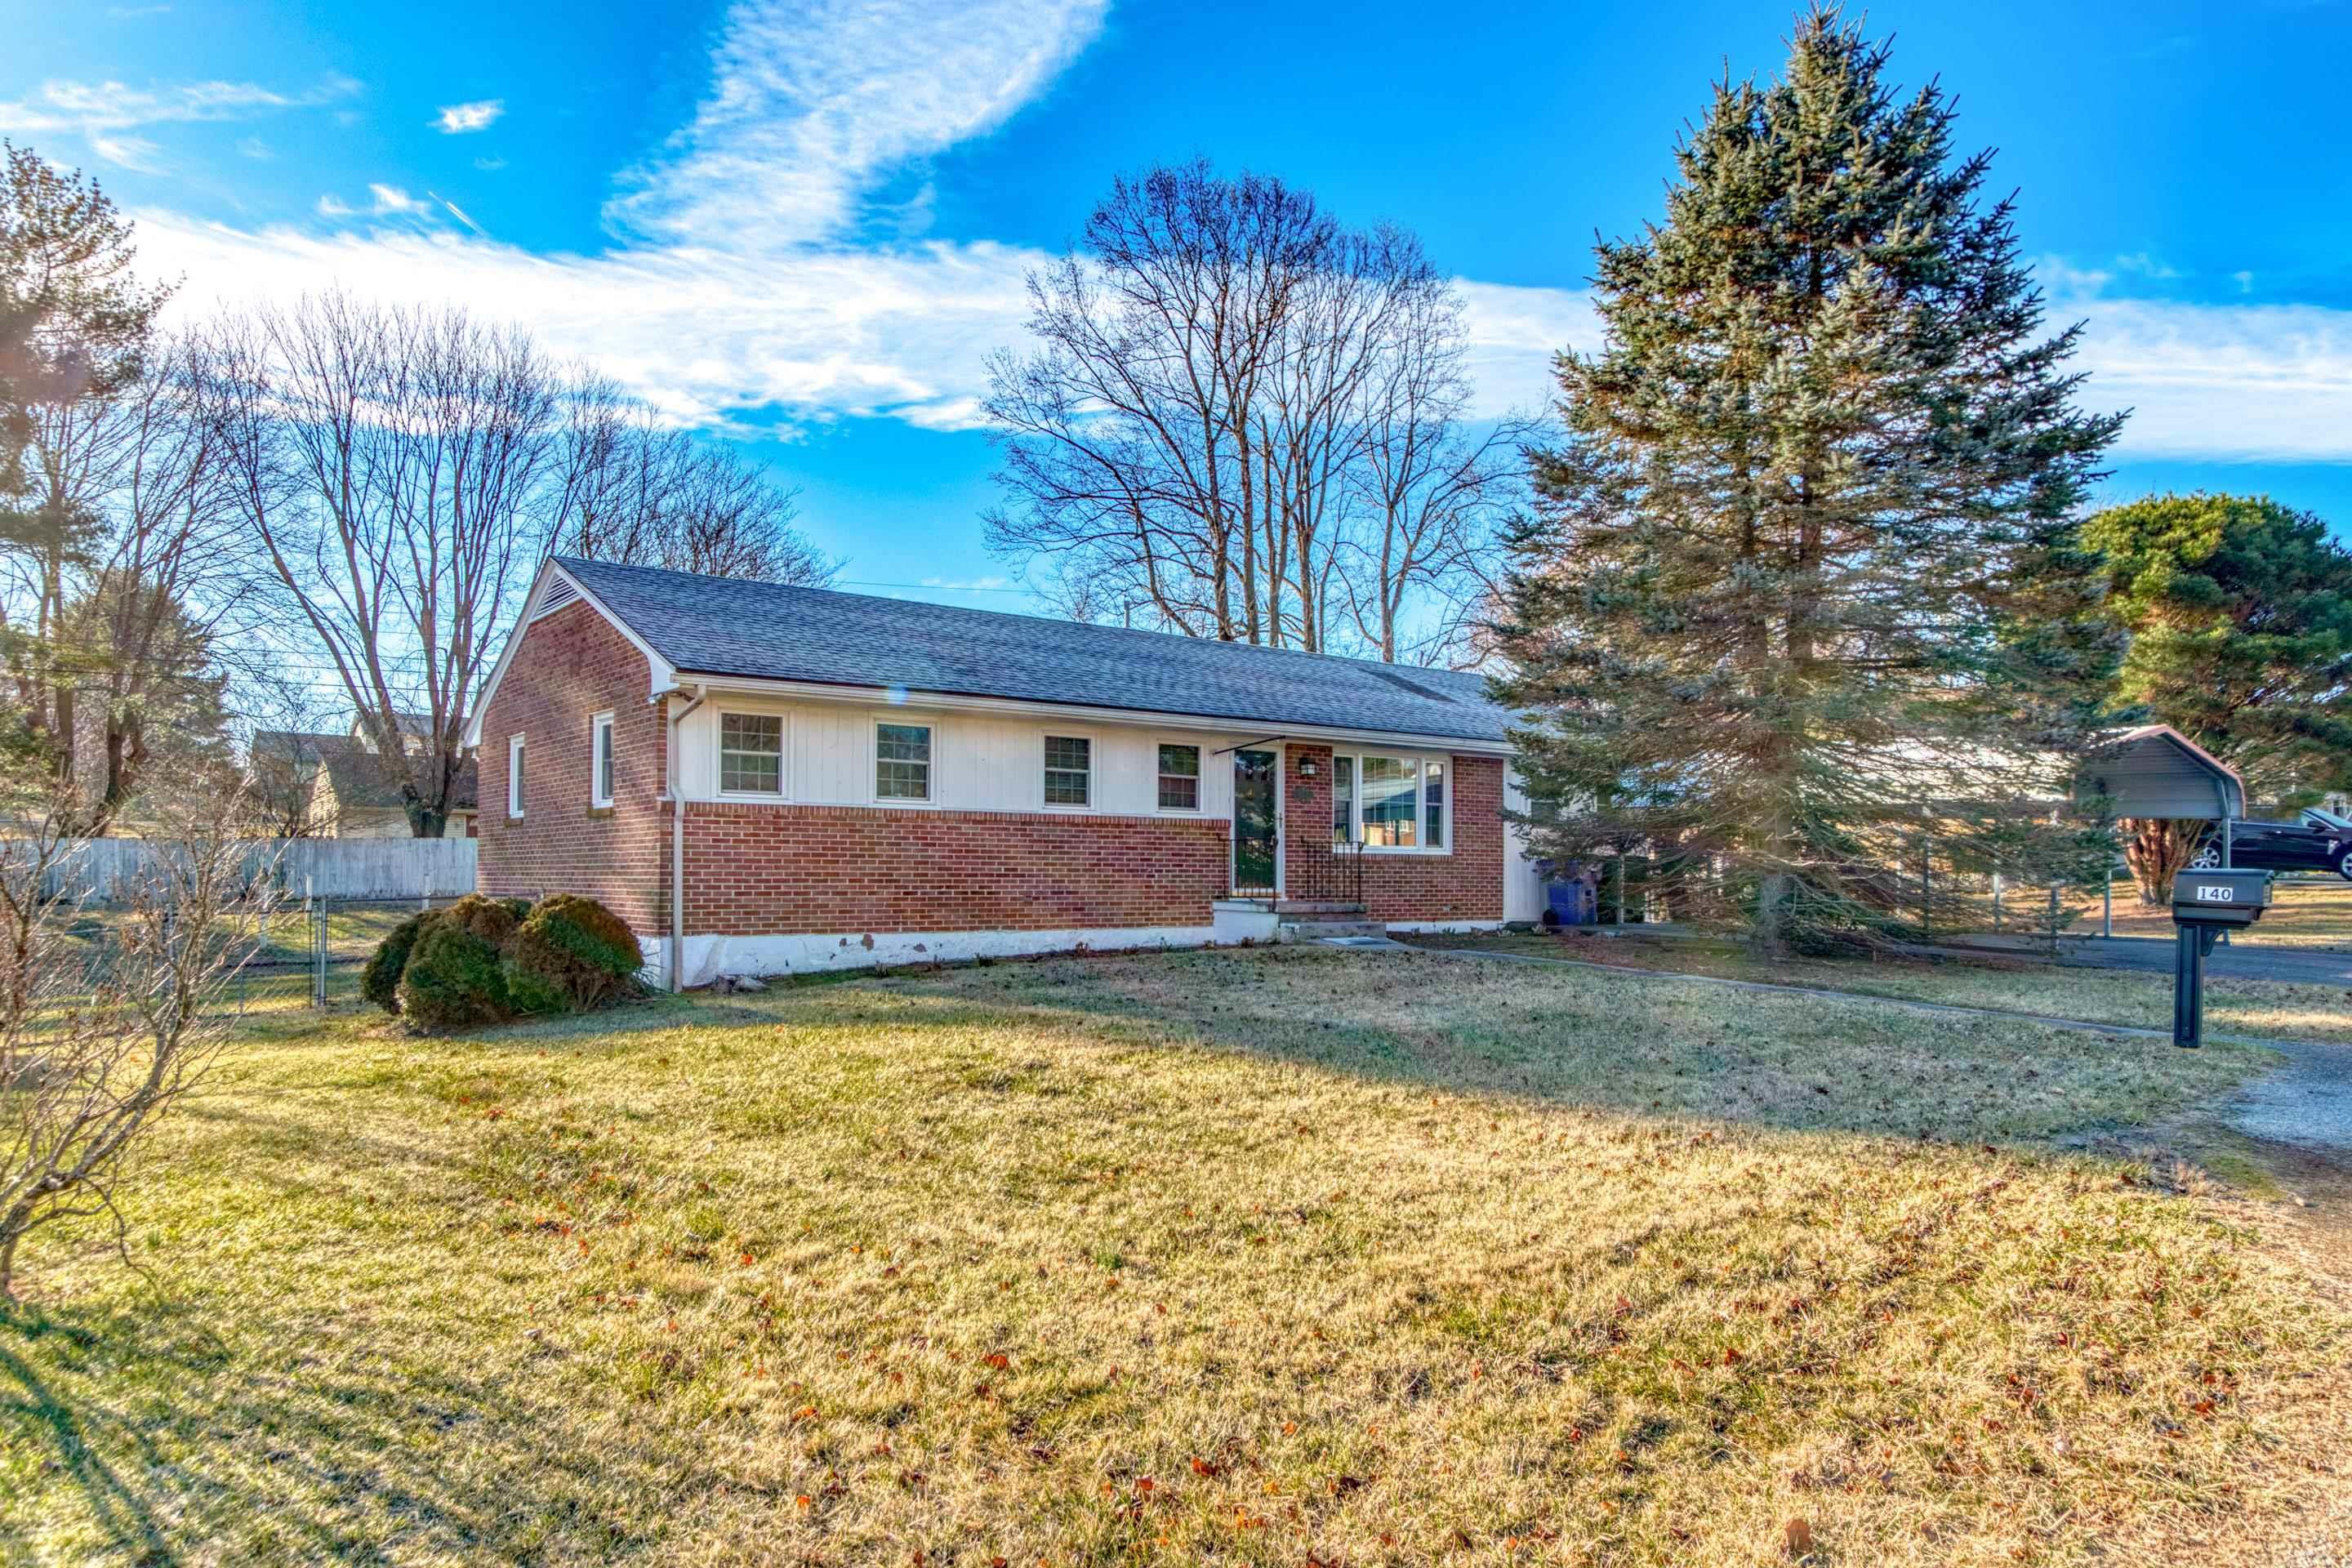 Beautiful, well maintained brick ranch located in a great neighborhood close to downtown Christiansburg! This home is in move in ready condition and has plenty of space on the main level with 3 bedrooms, 1 bathroom, kitchen, and recently repainted living room. Also boasts a nice sized bonus room off the kitchen that leads out to a screened in porch that connects to large deck area with a porch swing overlooking a large fenced in back yard. Potential garden space in the back yard along with a storage building with electricity. The finished basement has a tremendous rec room space or second living room potential along with a possible 4th bedroom and an additional bathroom. Other features include newer kitchen appliances all replaced since 2018 and new windows installed throughout the house in the past couple years! Come check it out today!!